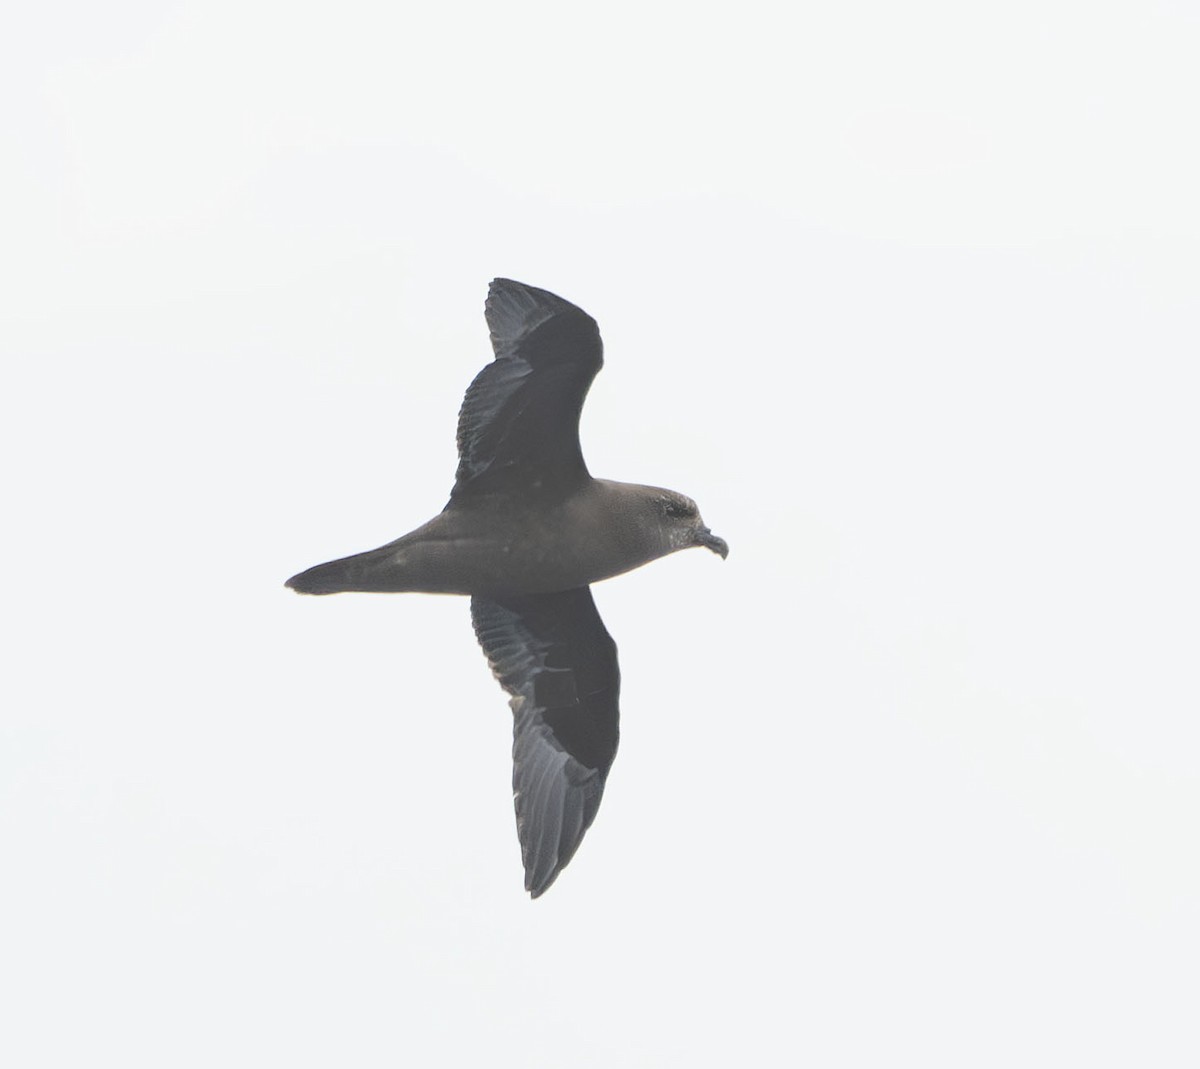 Great-winged Petrel - Philip Griffin